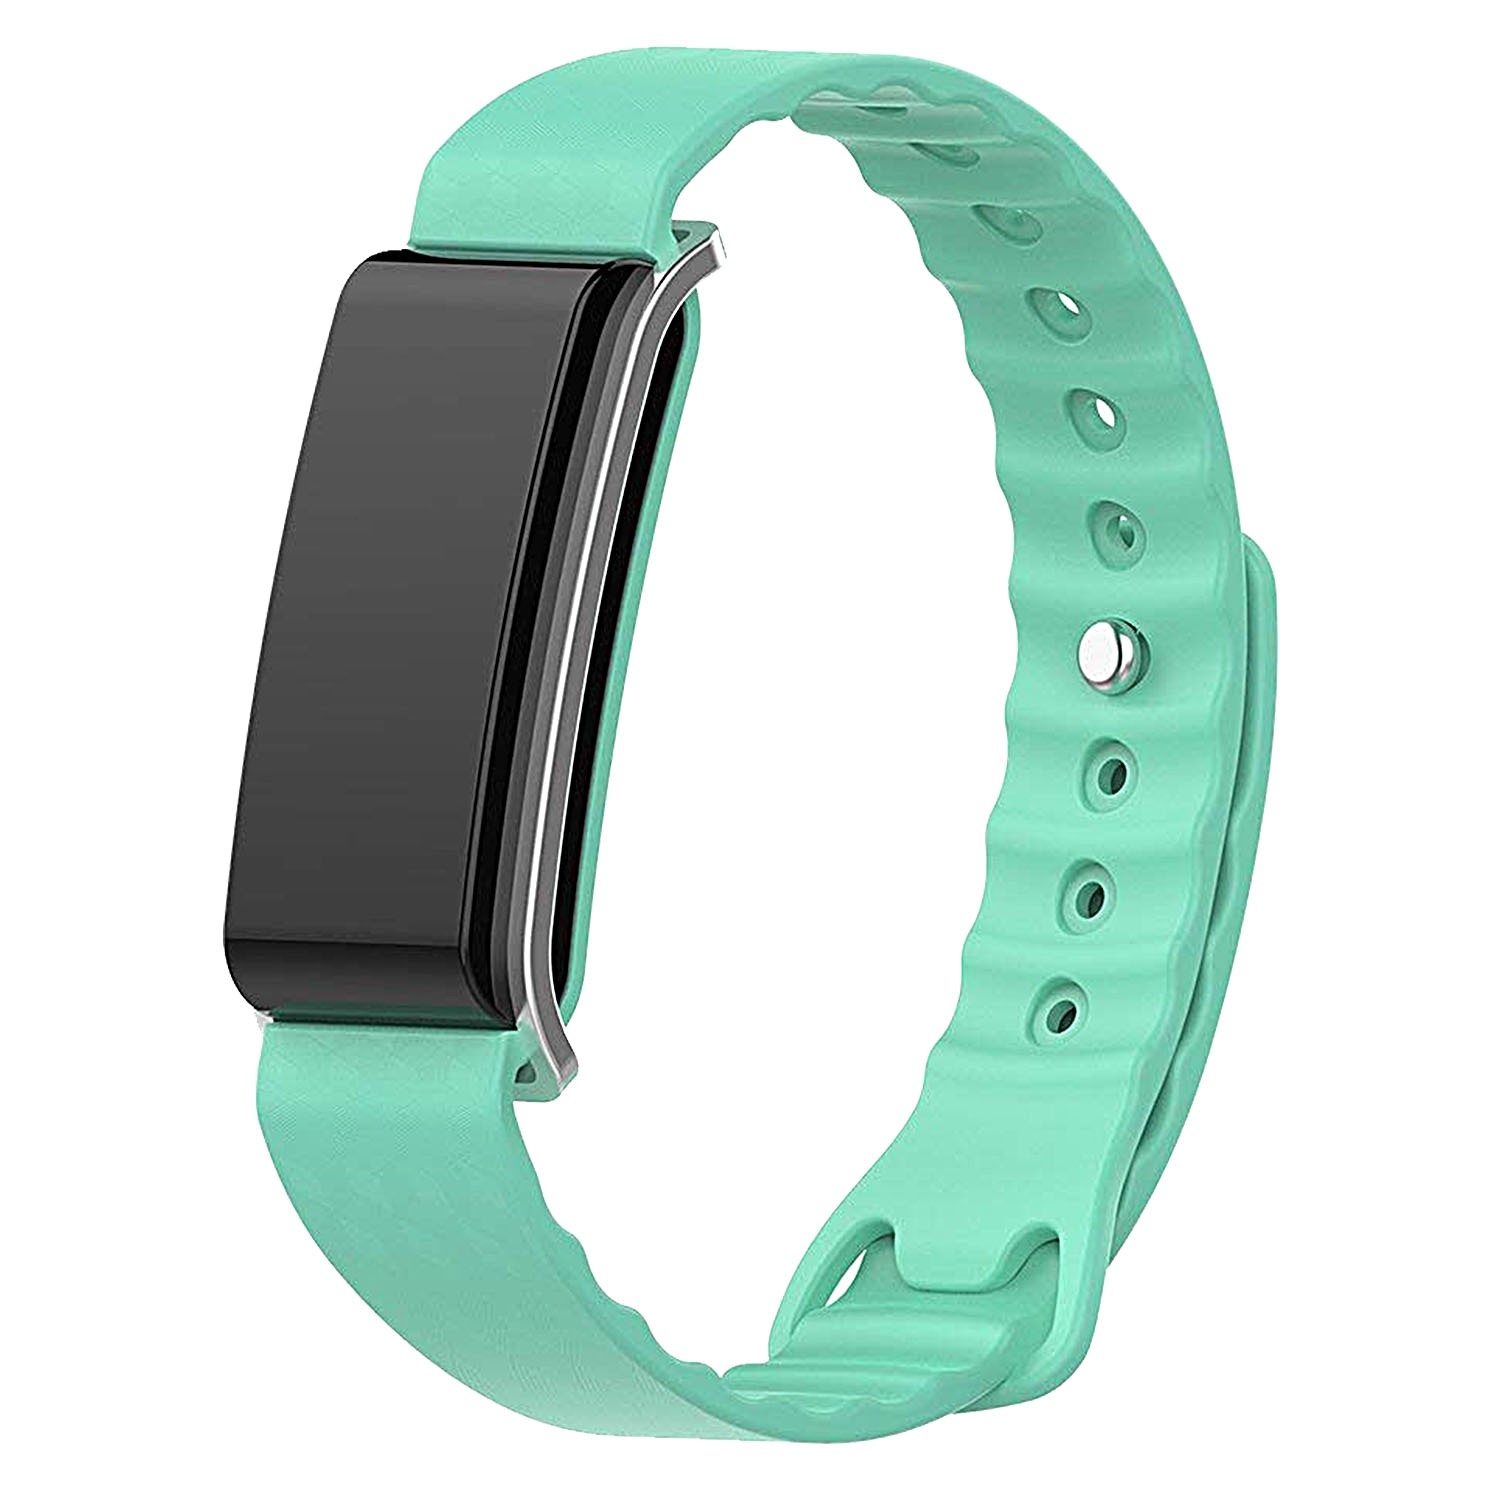 StrapsCo Classic Silicone Rubber Replacement Watch Strap for Huawei Honor/Color Band A2 - Turquoise